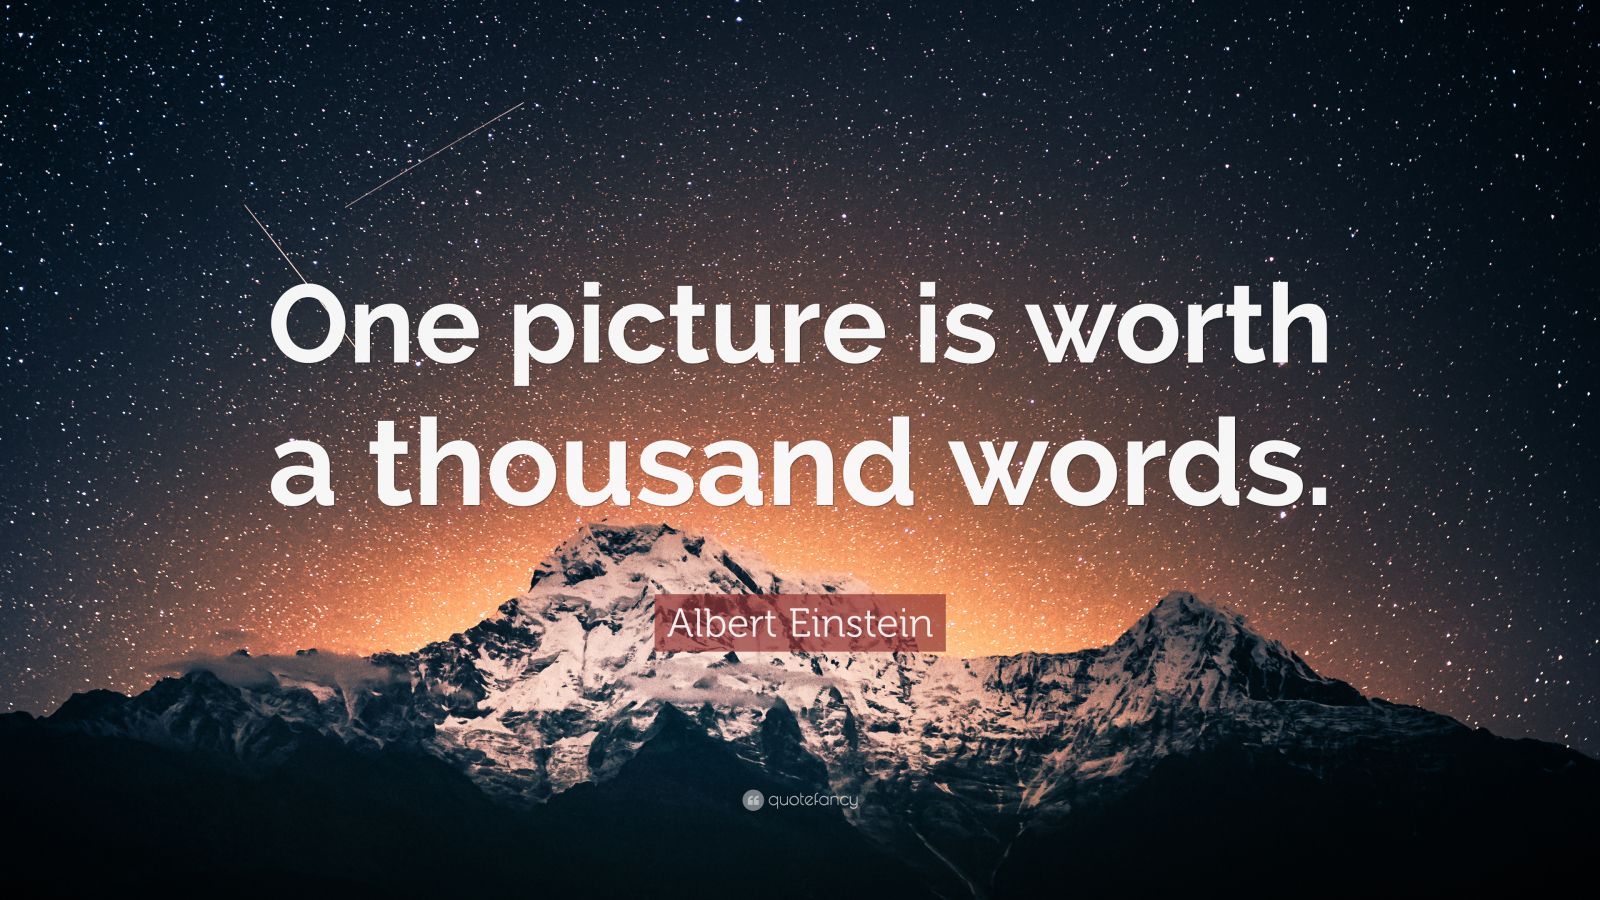 Albert Einstein Quote “one Picture Is Worth A Thousand Words” 12 Wallpapers Quotefancy 